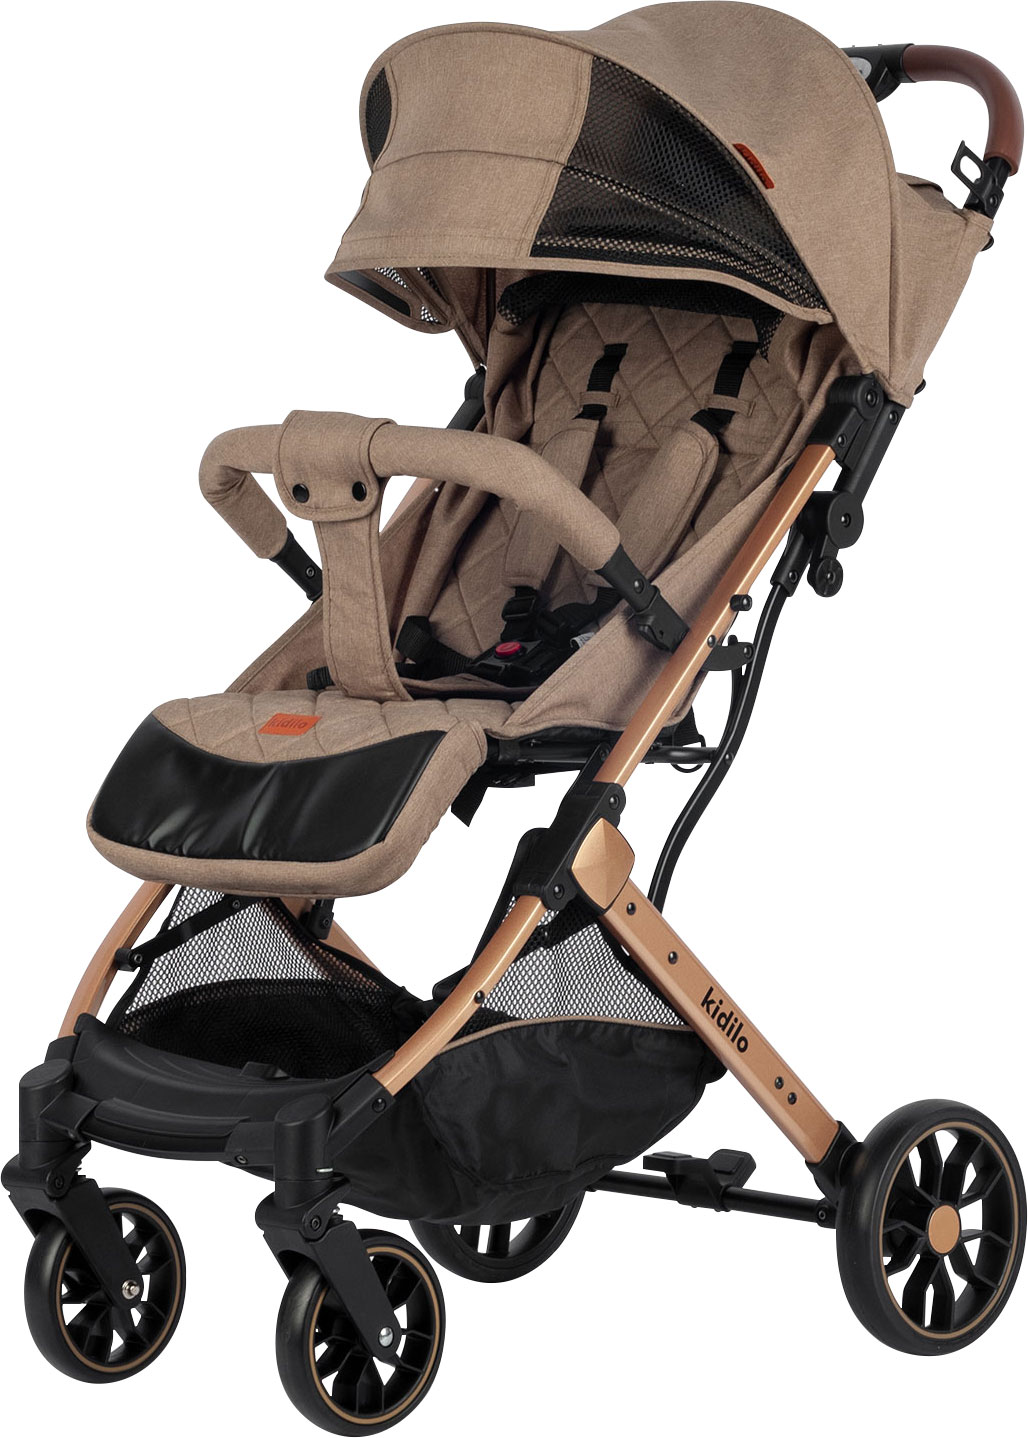 Kidilo Compact Suitcase Baby Stroller